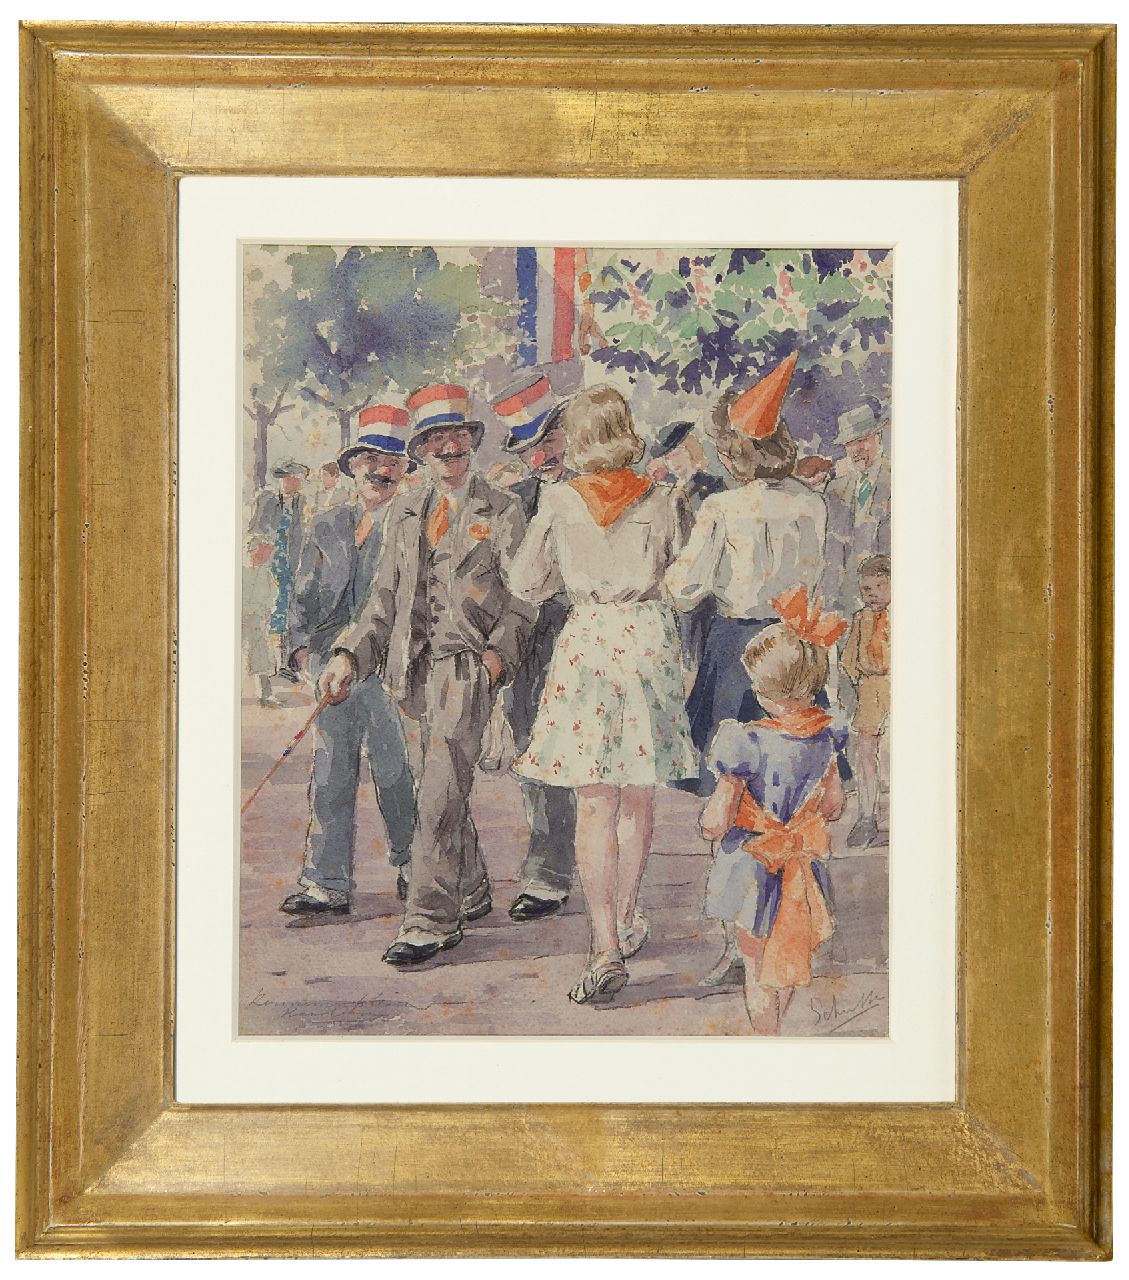 Schutte L.H.H.  | 'Louis' Hermanus Hendrikus Schutte | Watercolours and drawings offered for sale | Celebrating the Queen's Birthday on the Kennemerplein in Haarlem, chalk and watercolour on paper 25.4 x 20.9 cm, signed l.r.